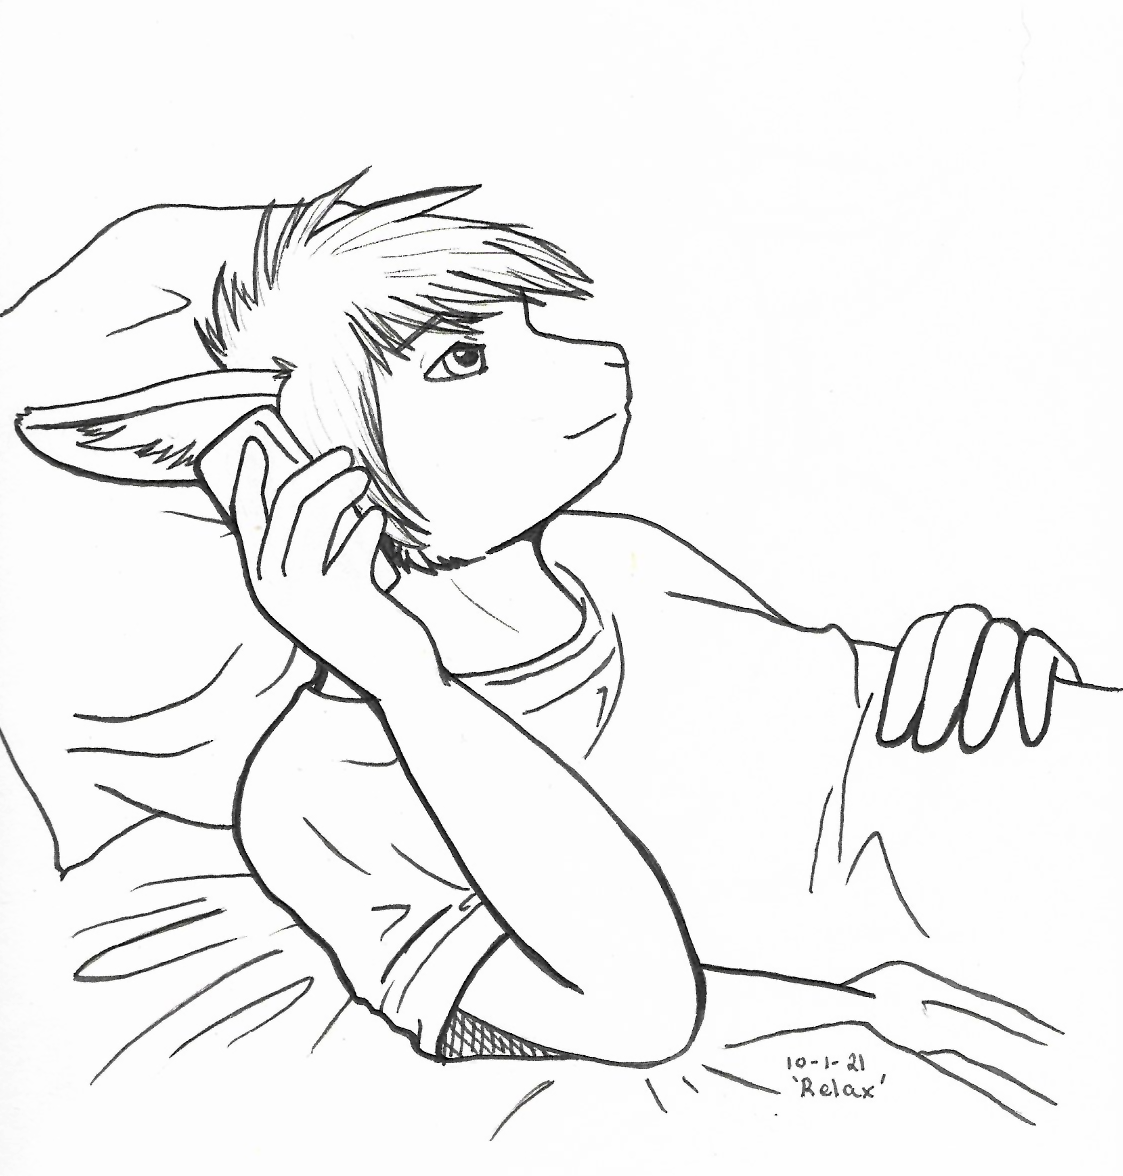 An OC-tober drawing, with Clintz relaxing on the phone as Sigh rambles on. He's more of a listener than a talker.